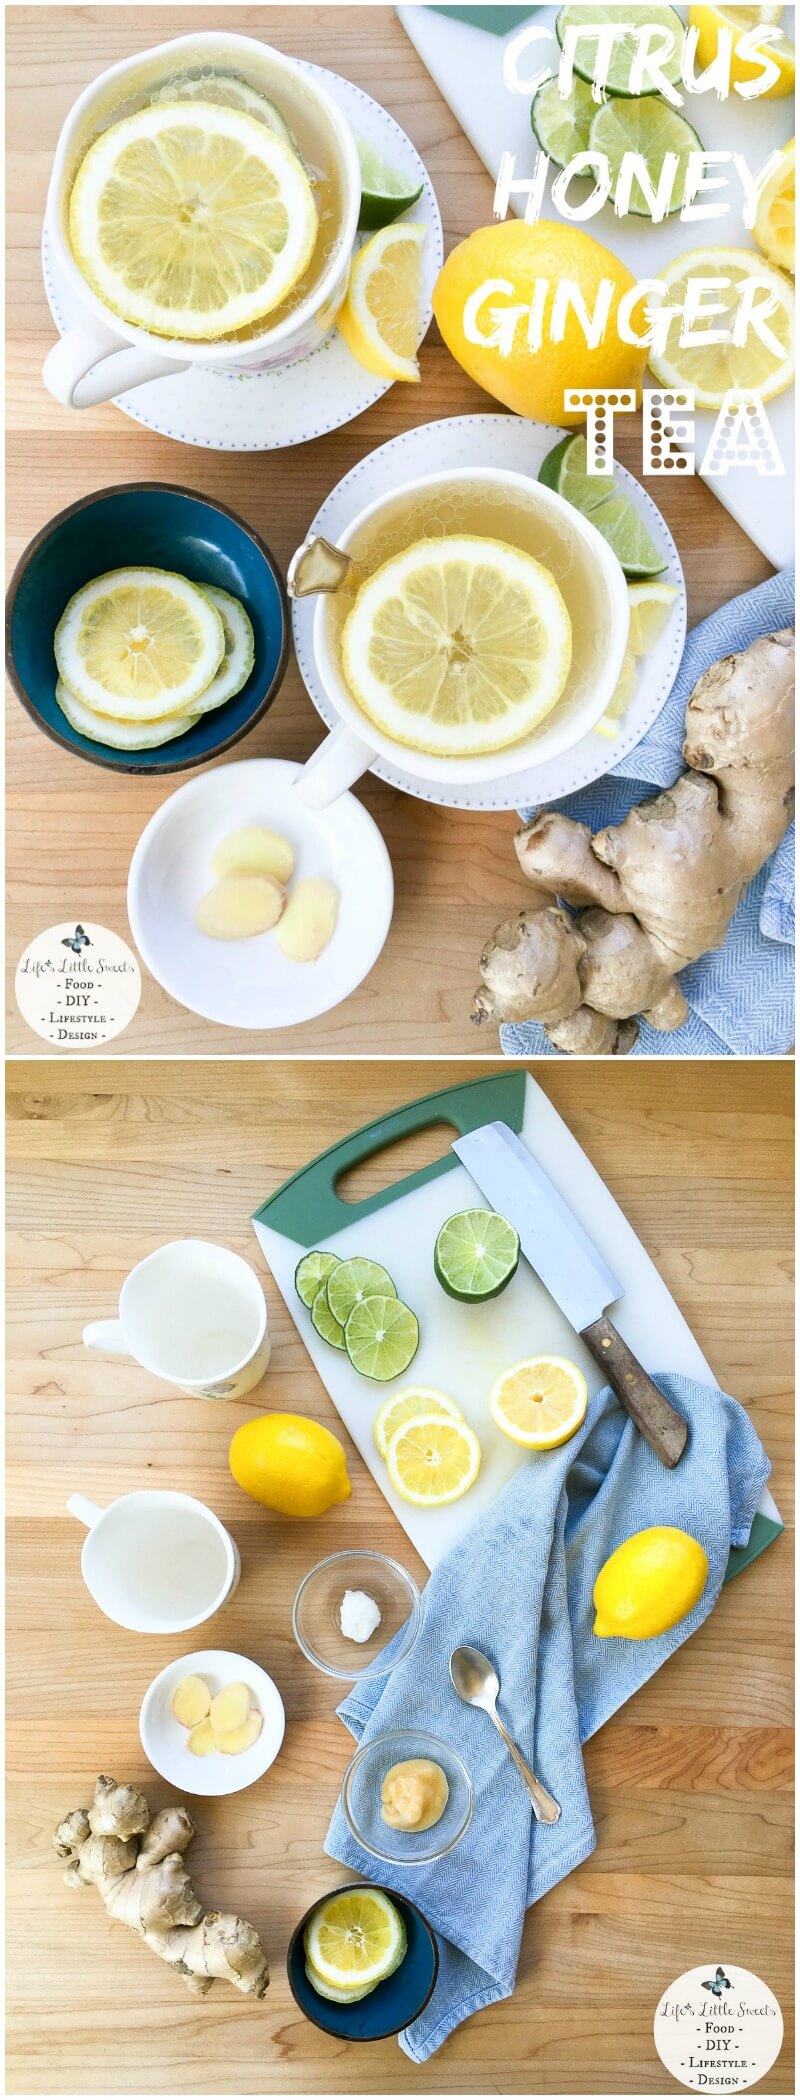 Citrus Honey Ginger Tea is an invigorating, fresh, hot, tea drink to help banish winter health woes and it is our go-to cold & flu remedy. #citrus #lemon #lime #ginger #coconutoil #tea #coldremedy 